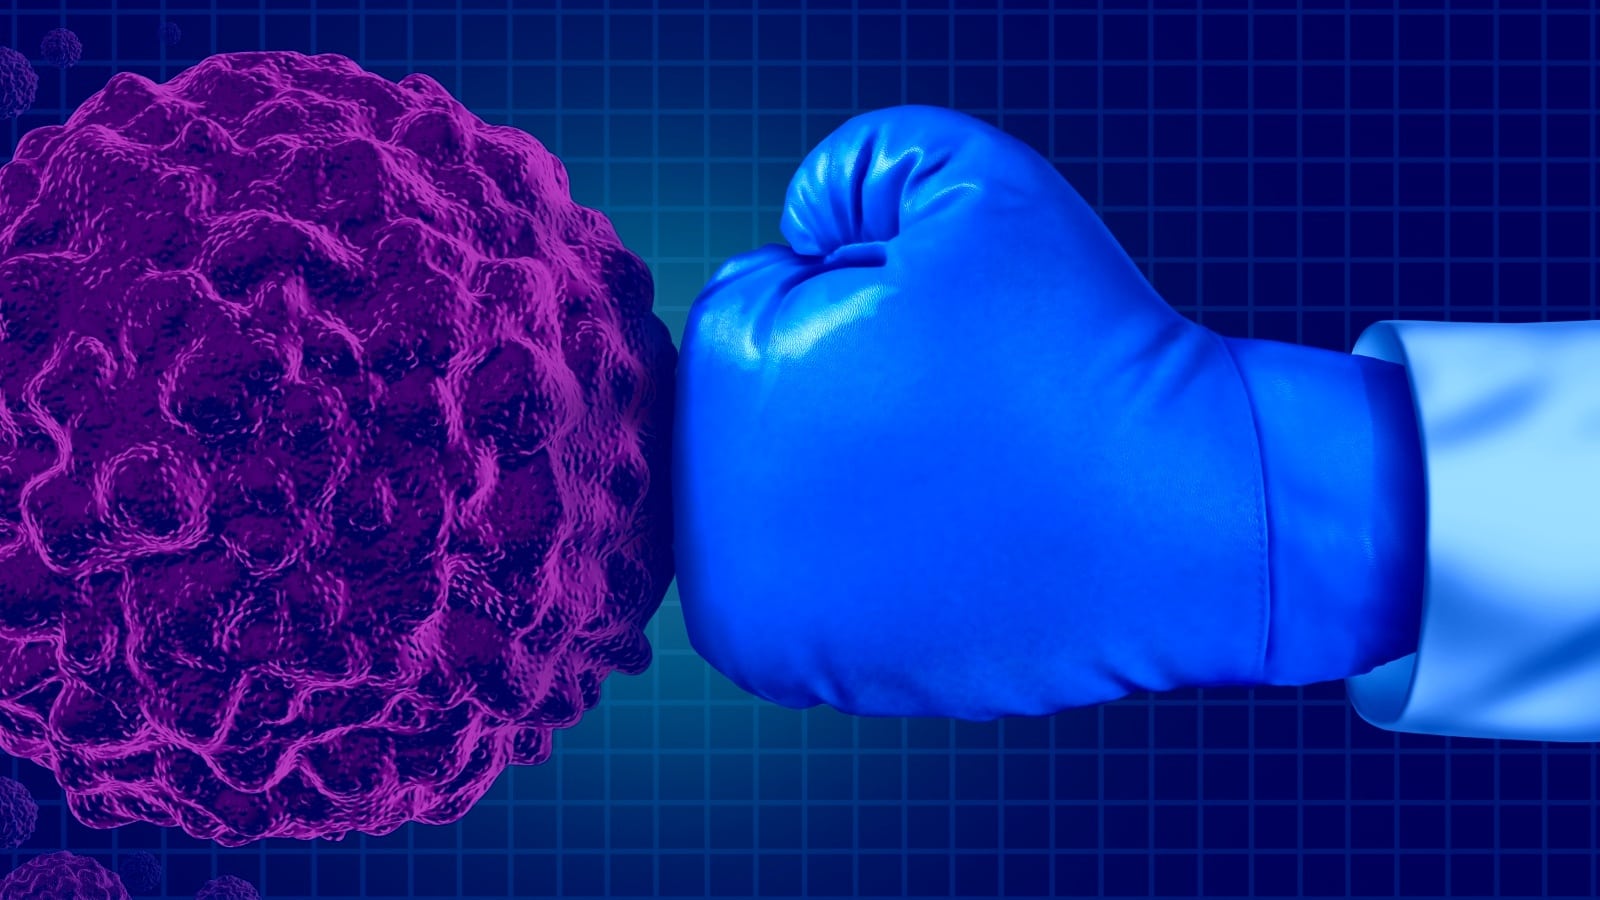 Empowering the immune system to knock out cancer. Image by Lightspring via Shutterstock.com